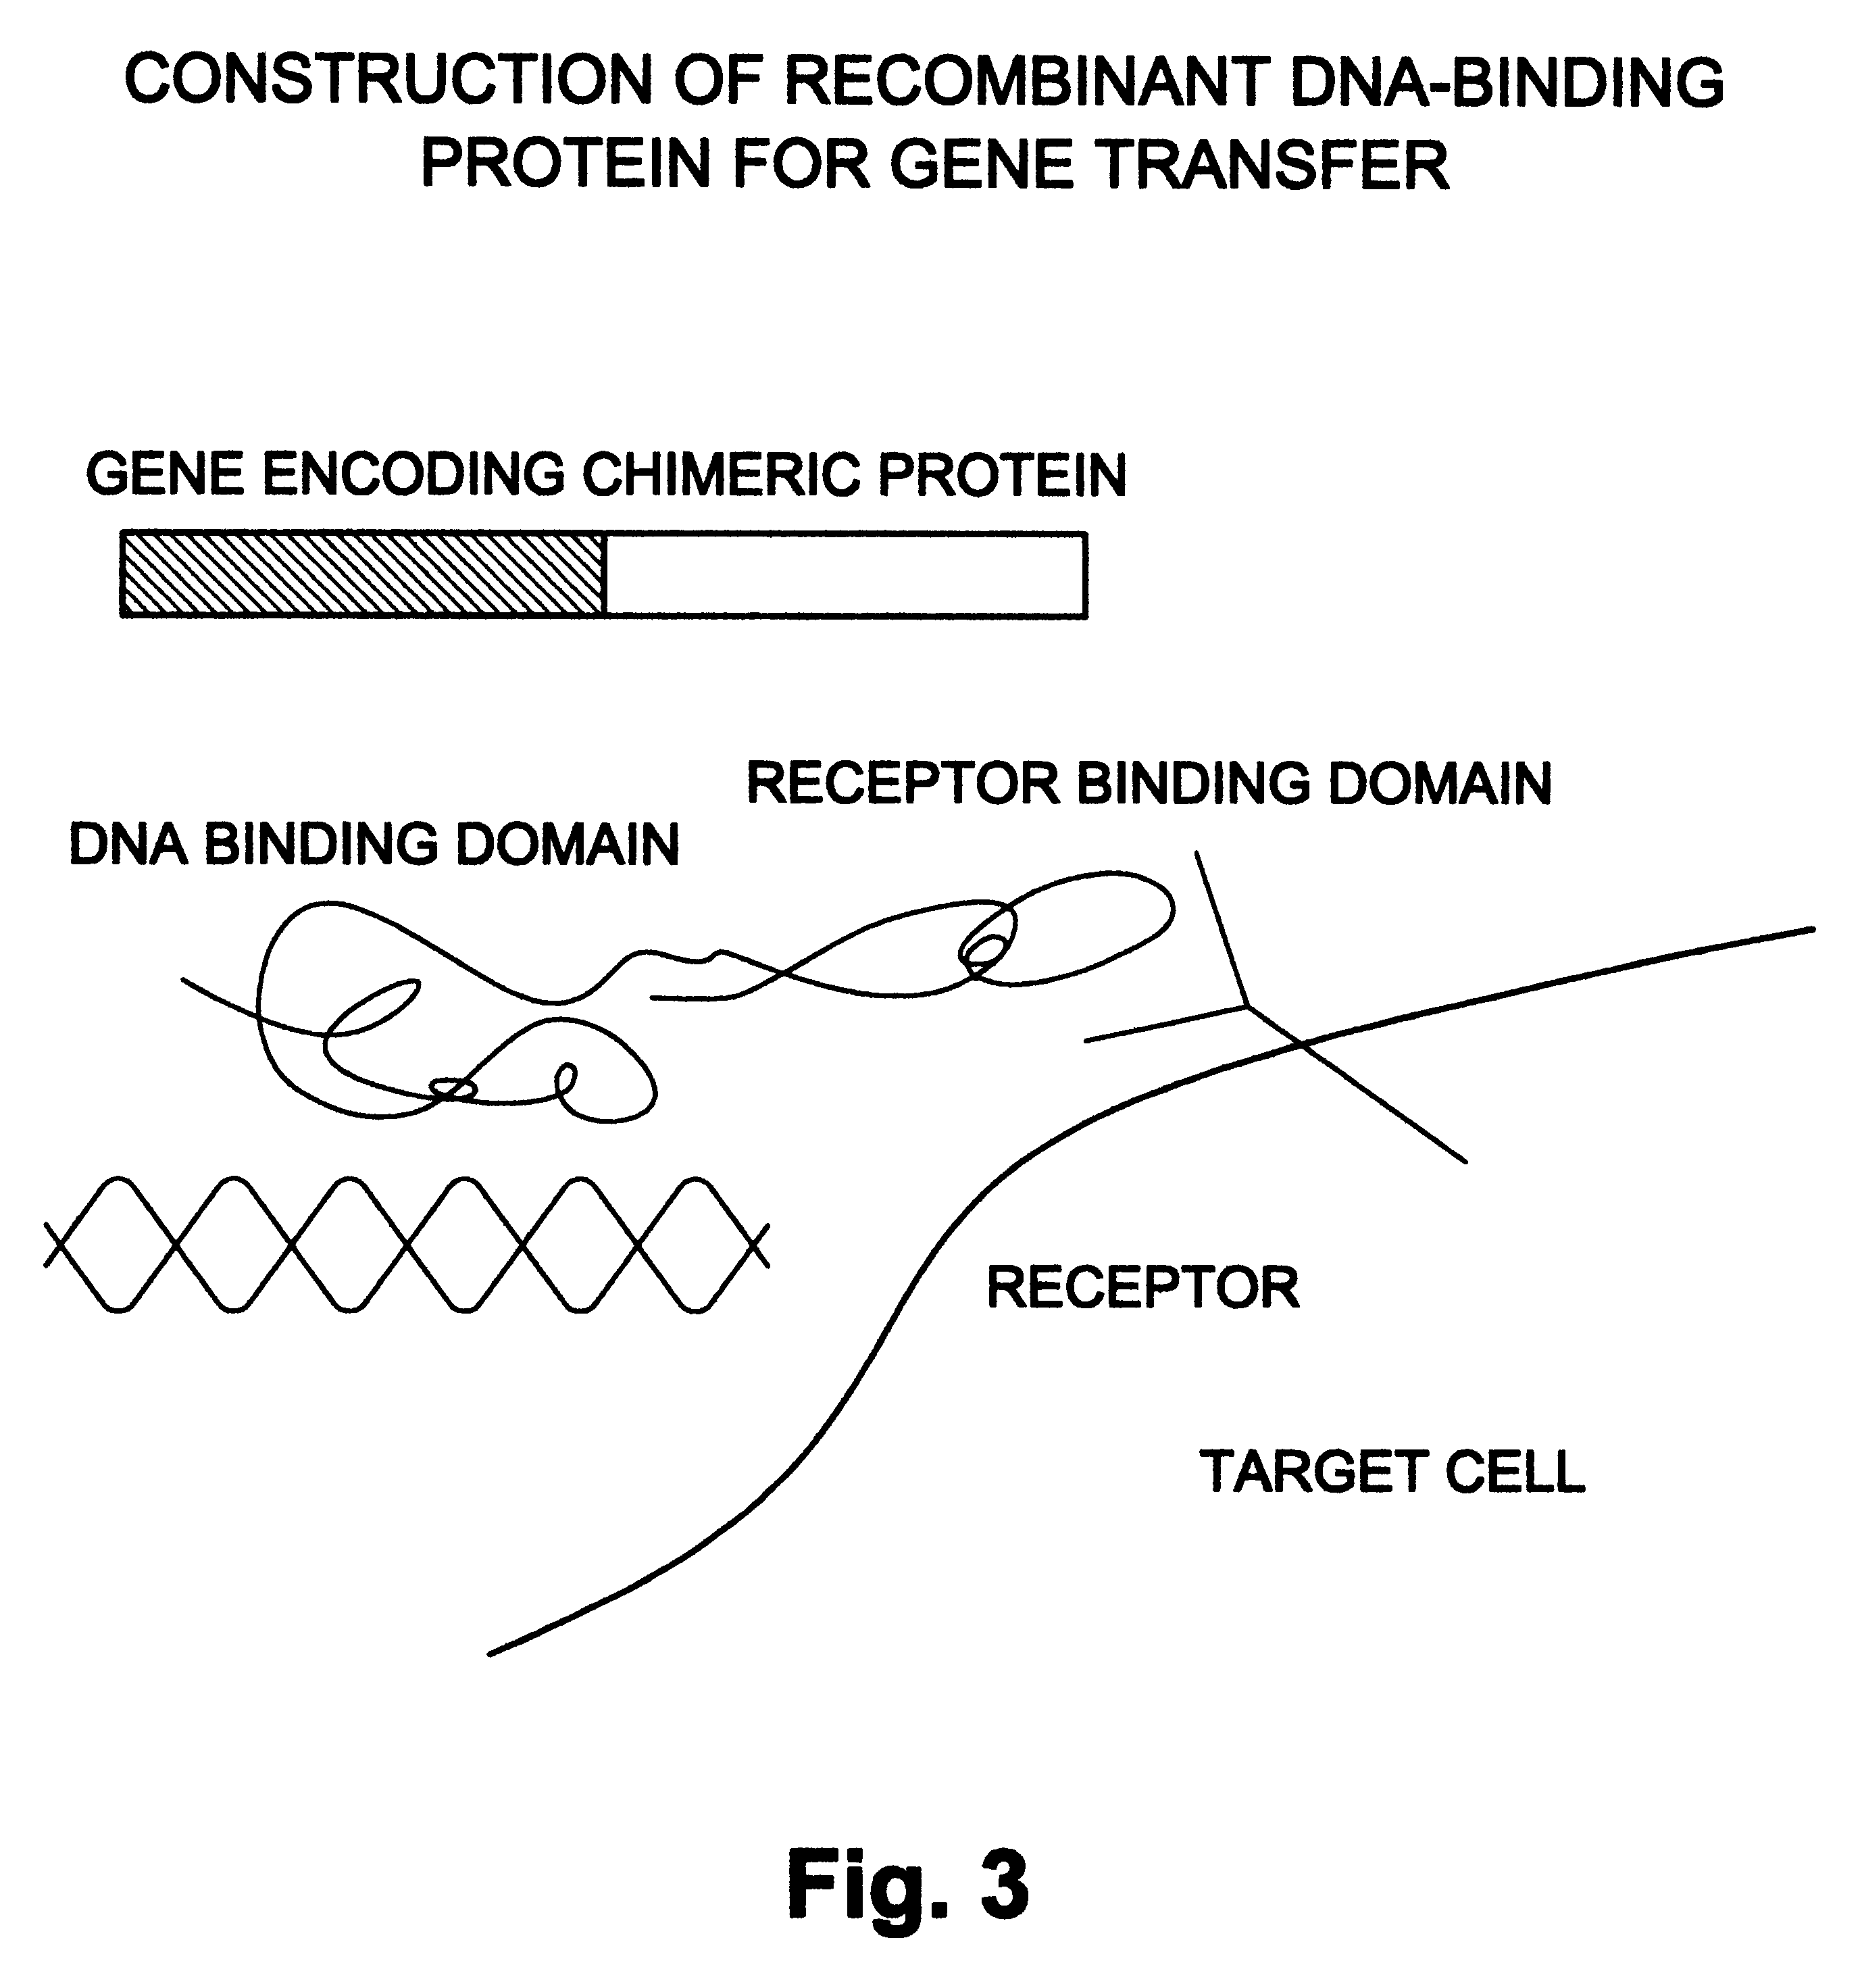 Natural or recombinant DNA binding proteins as carriers for gene transfer or gene therapy